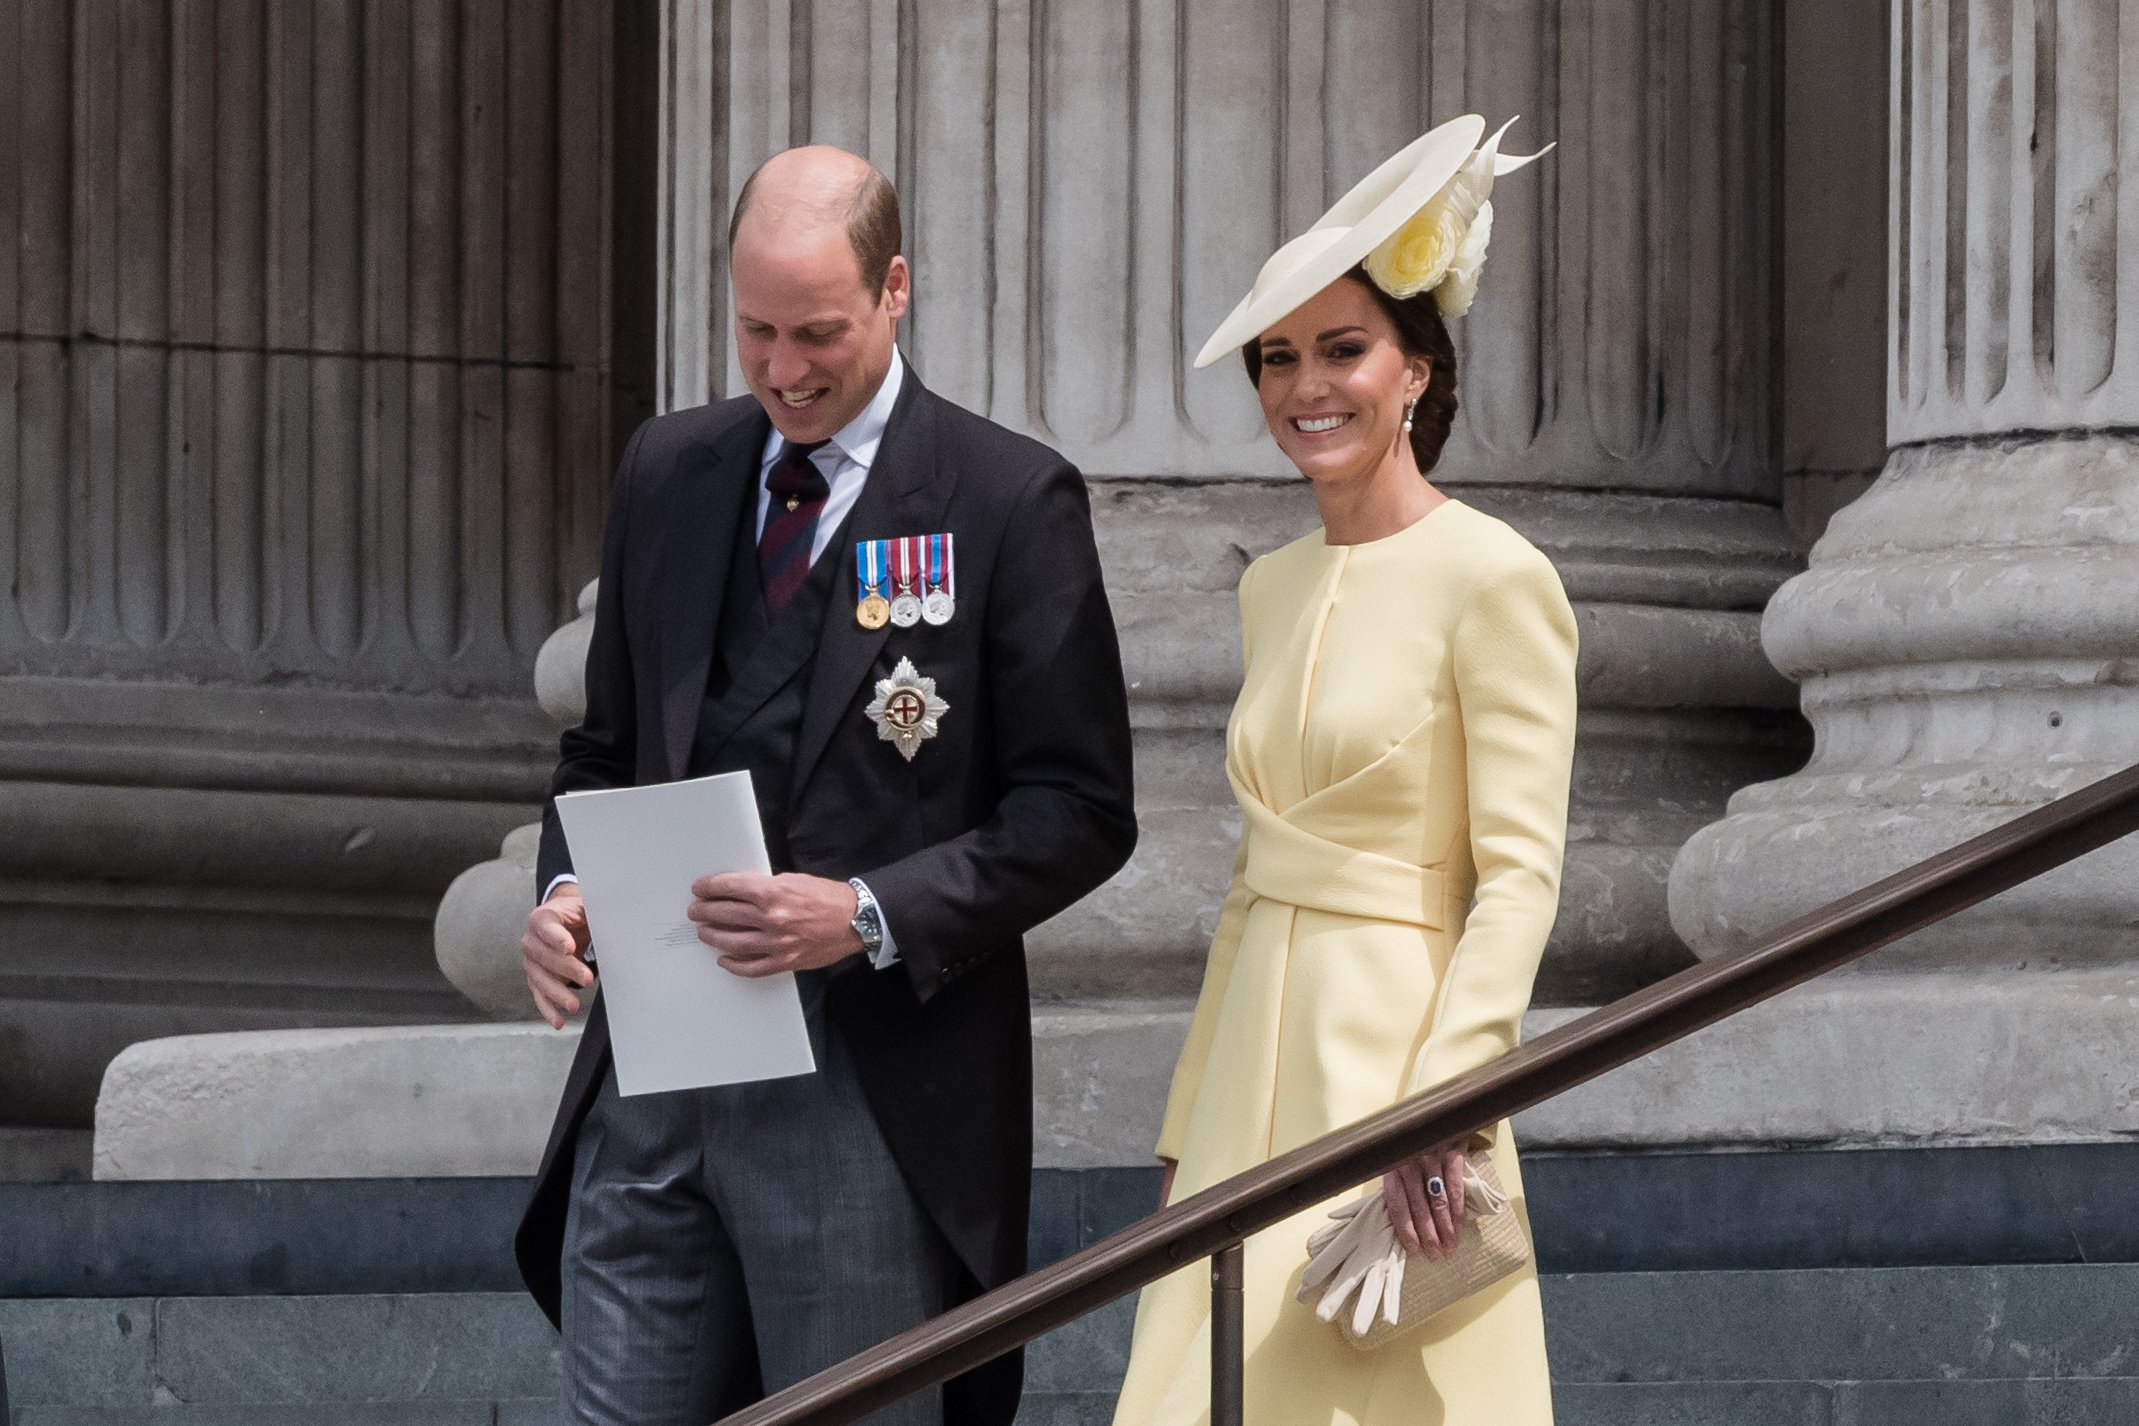 Prince William, Duke of Cambridge, and Catherine, Duchess of Cambridge leave St Paul's Cathedral after attending Service of Thanksgiving for The Queen's during the Platinum Jubilee celebrations in London, United Kingdom on June 03, 2022. | Source: Getty Images